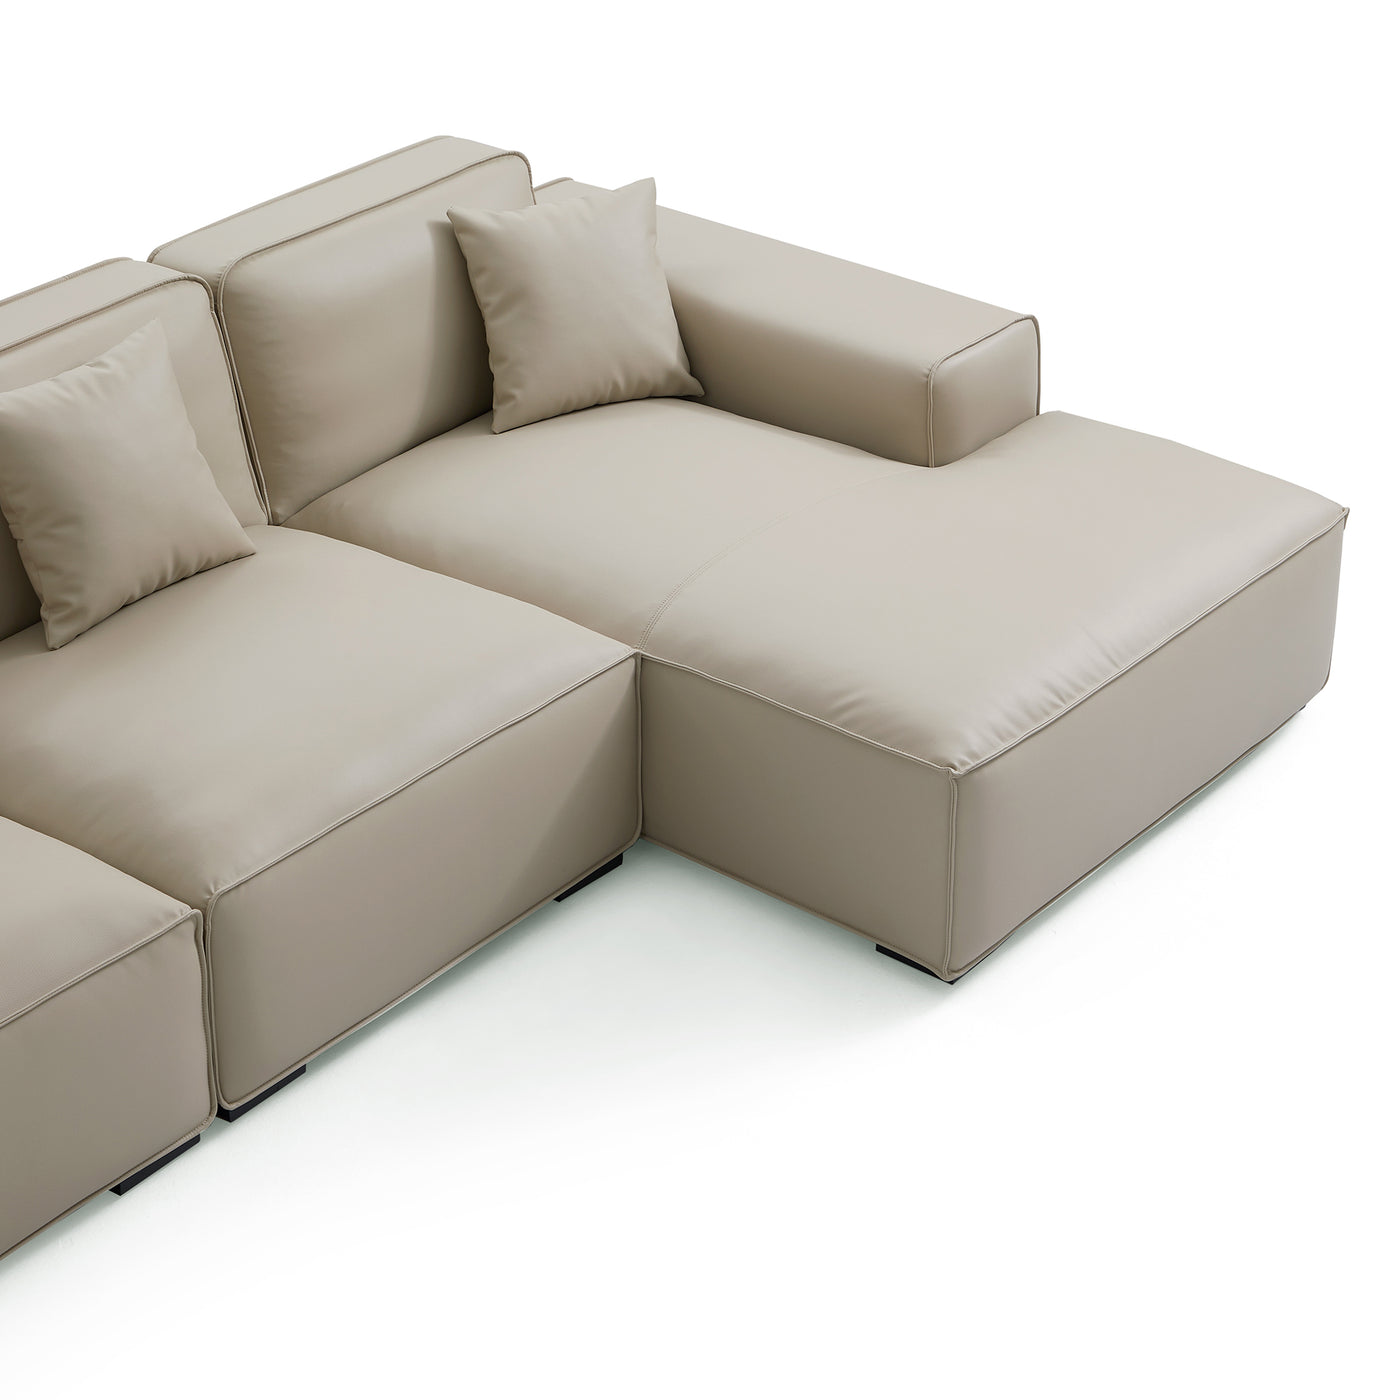 Domus Modular Black Leather Sectional Sofa-Beige-126.0"-Facing Right